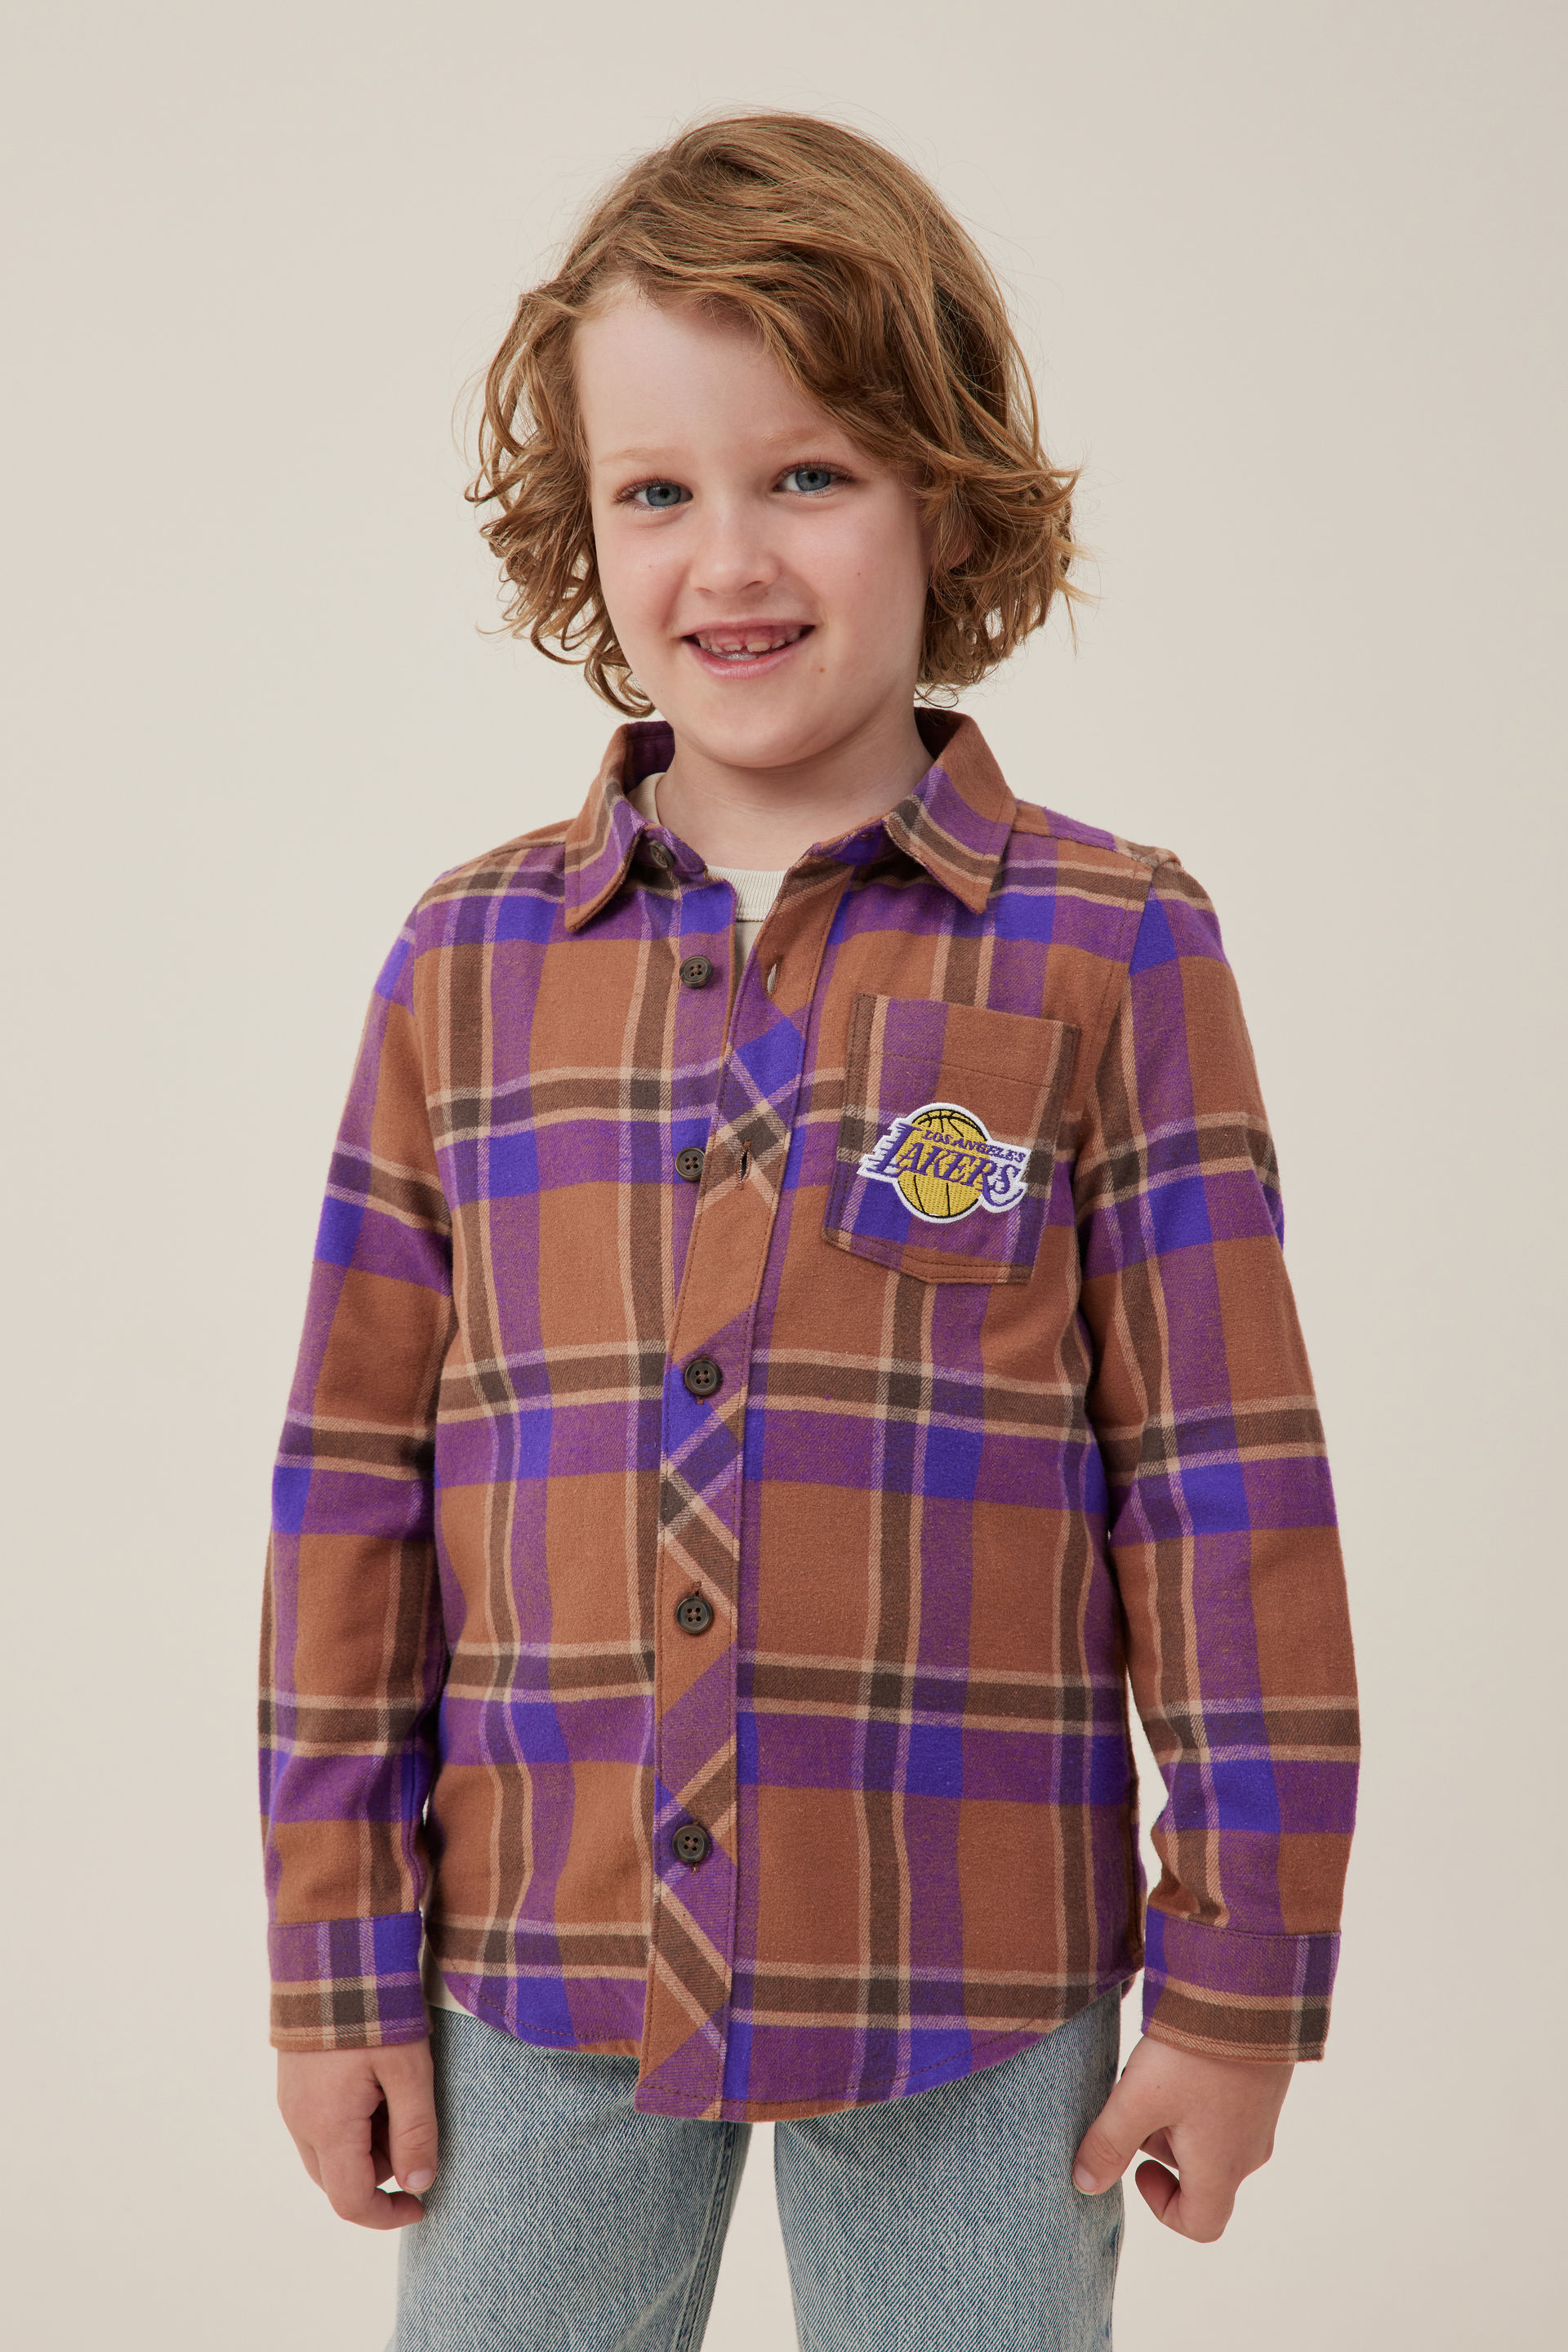 lakers flannel shirt